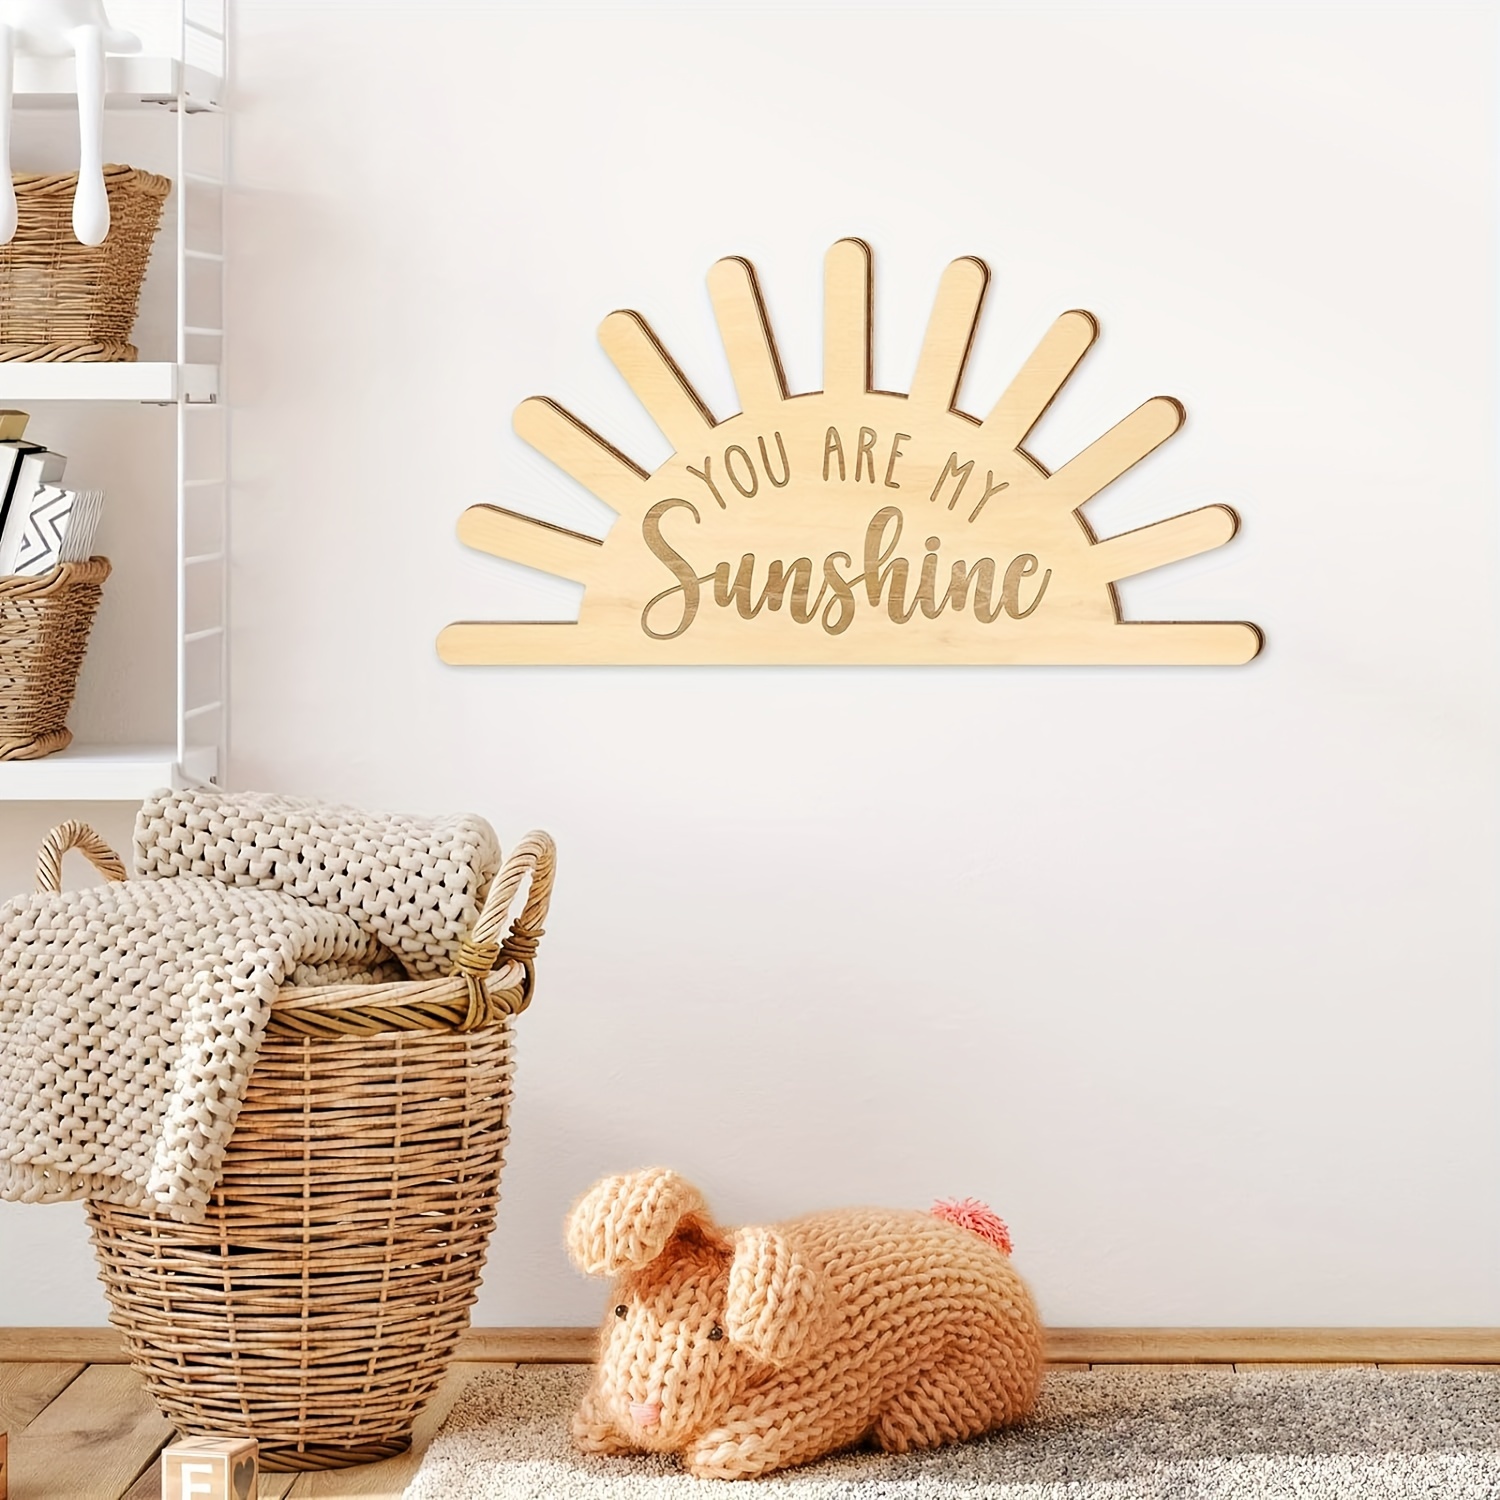 

You Are My Sunshine Wooden Wall Decor, Farmhouse Style, Reusable Irregular Shaped Wood Mural, No Electricity Required